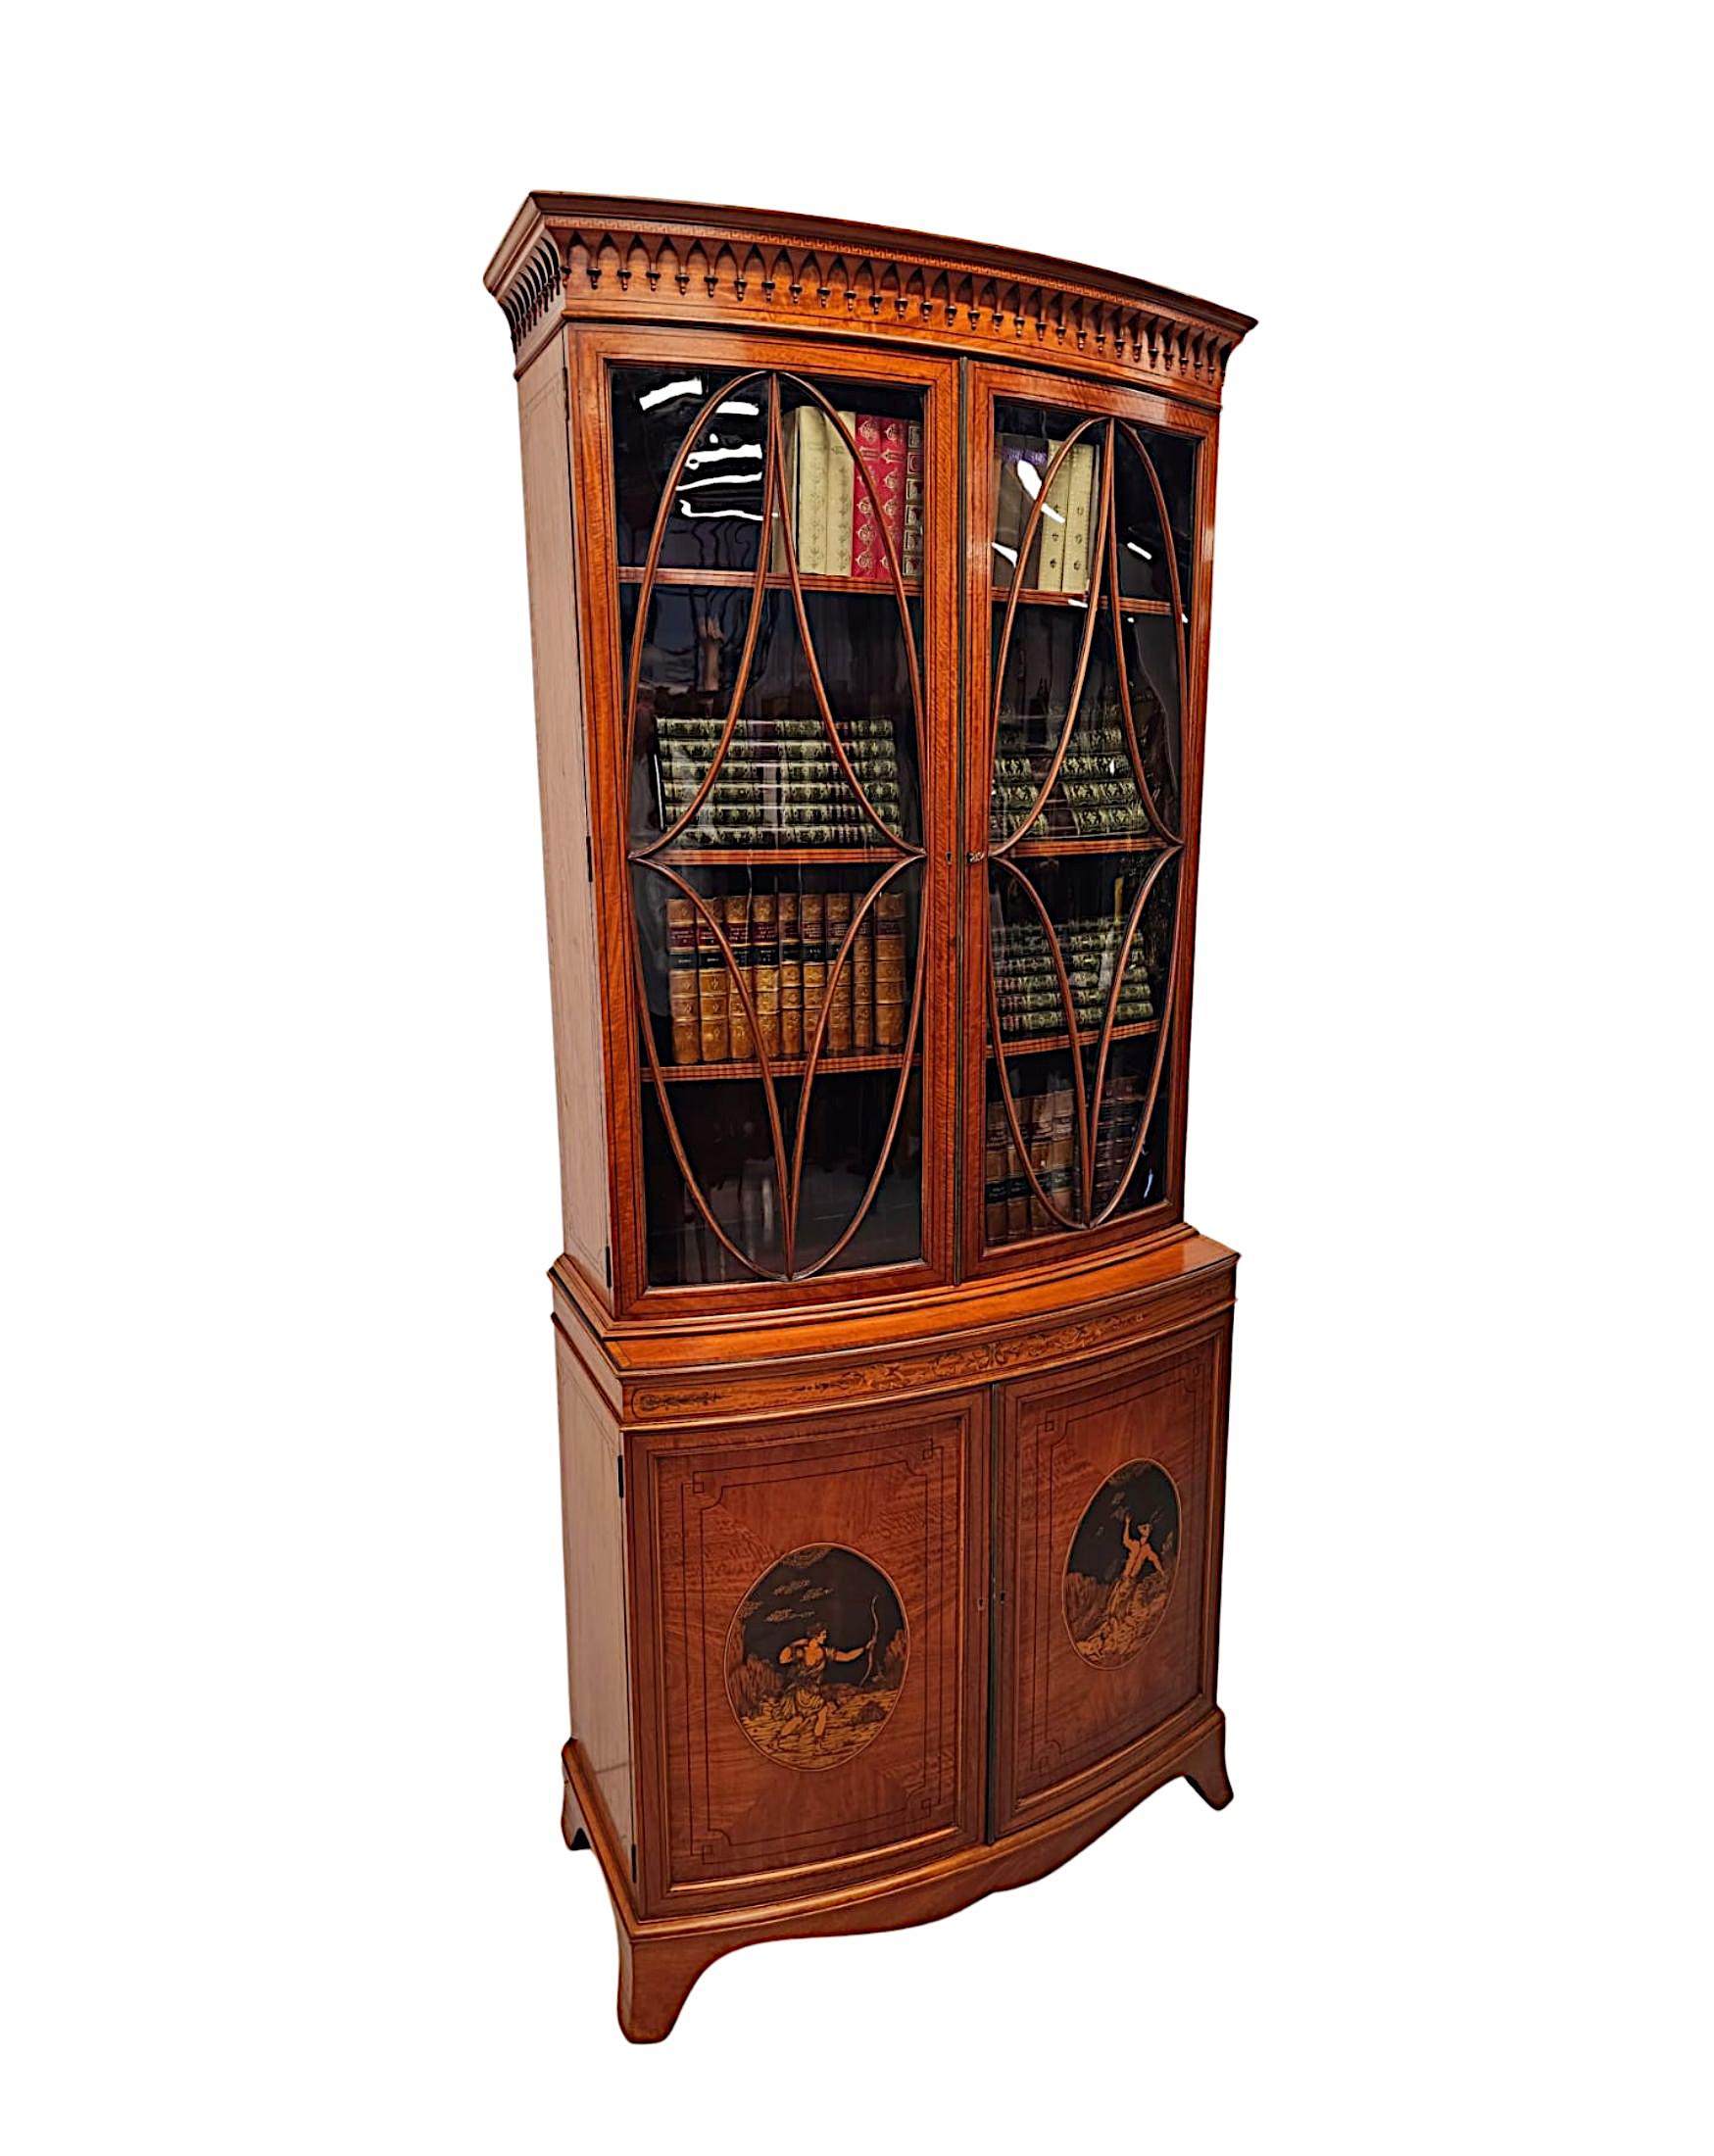 A very fine Edwardian well figured satinwood bowfronted bookcase in the manner of Edward and Roberts, London, of exceptional quality, line inlaid, fabulously carved with gorgeously rich patination, grain and with stunning marquetry detail of